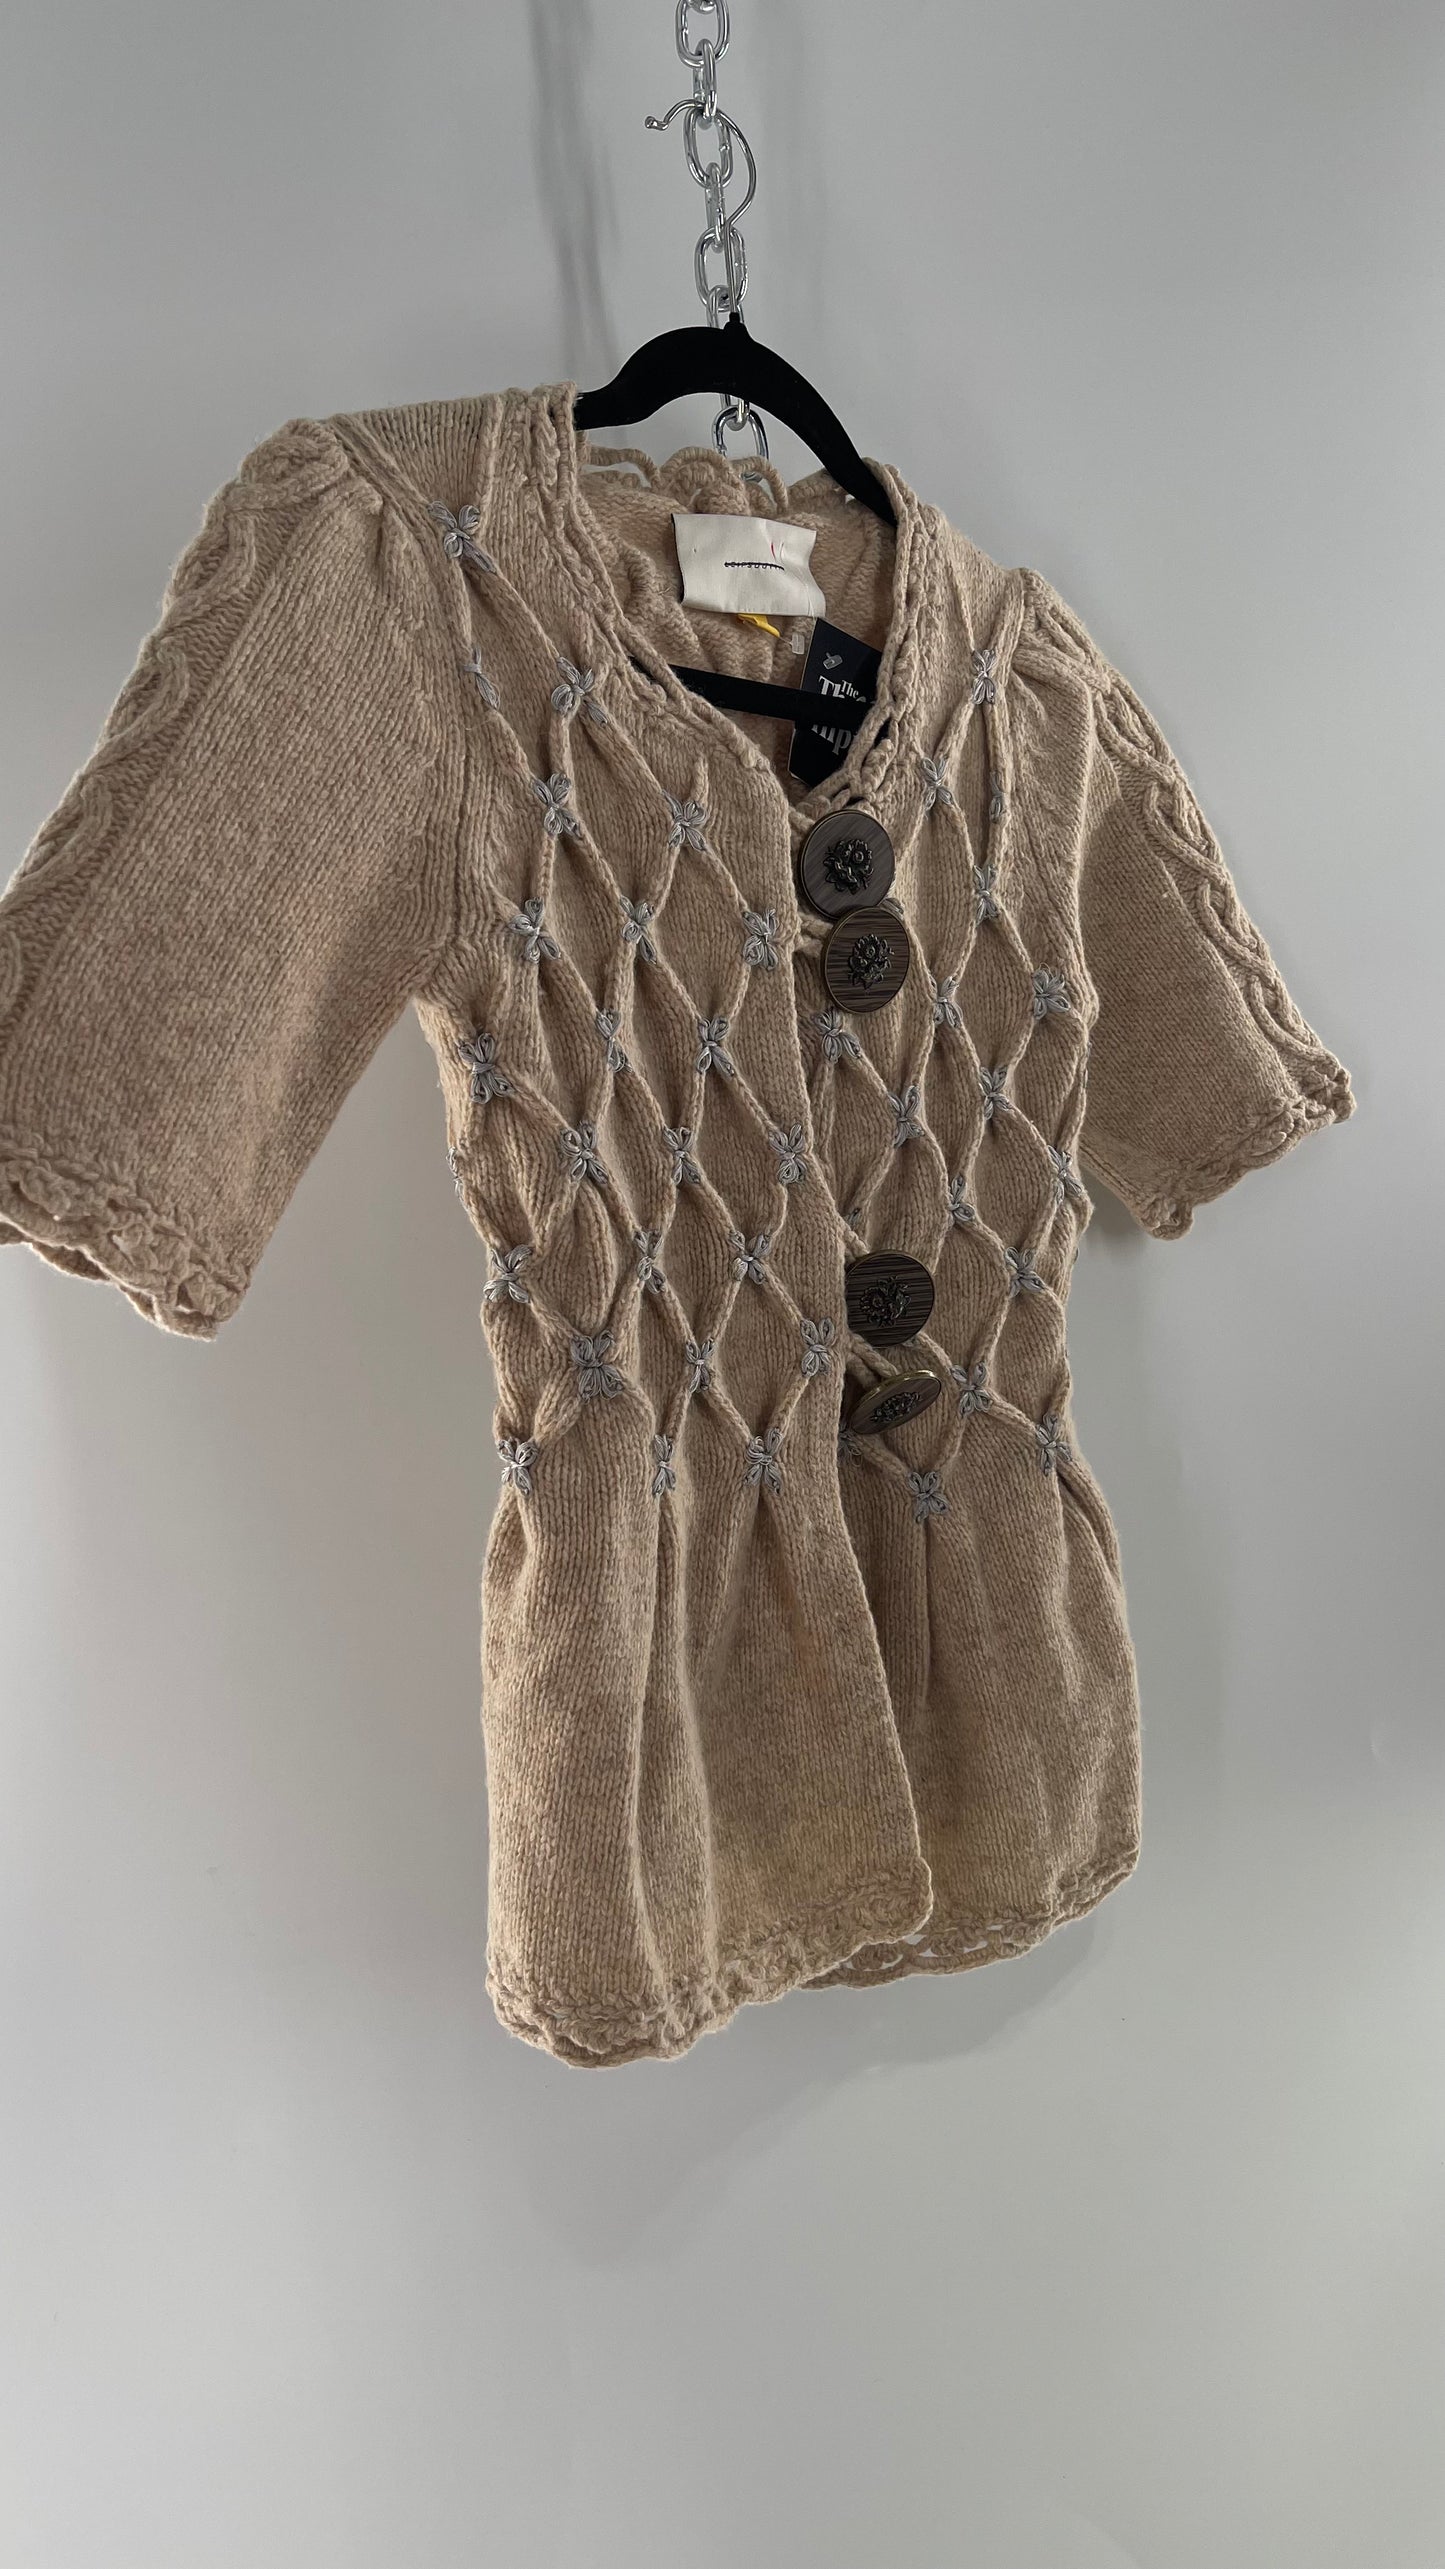 Anthropologie Leifsdottir Knit Argyle Embroidered Sweater with Oversized Statement Buttons  (XS)